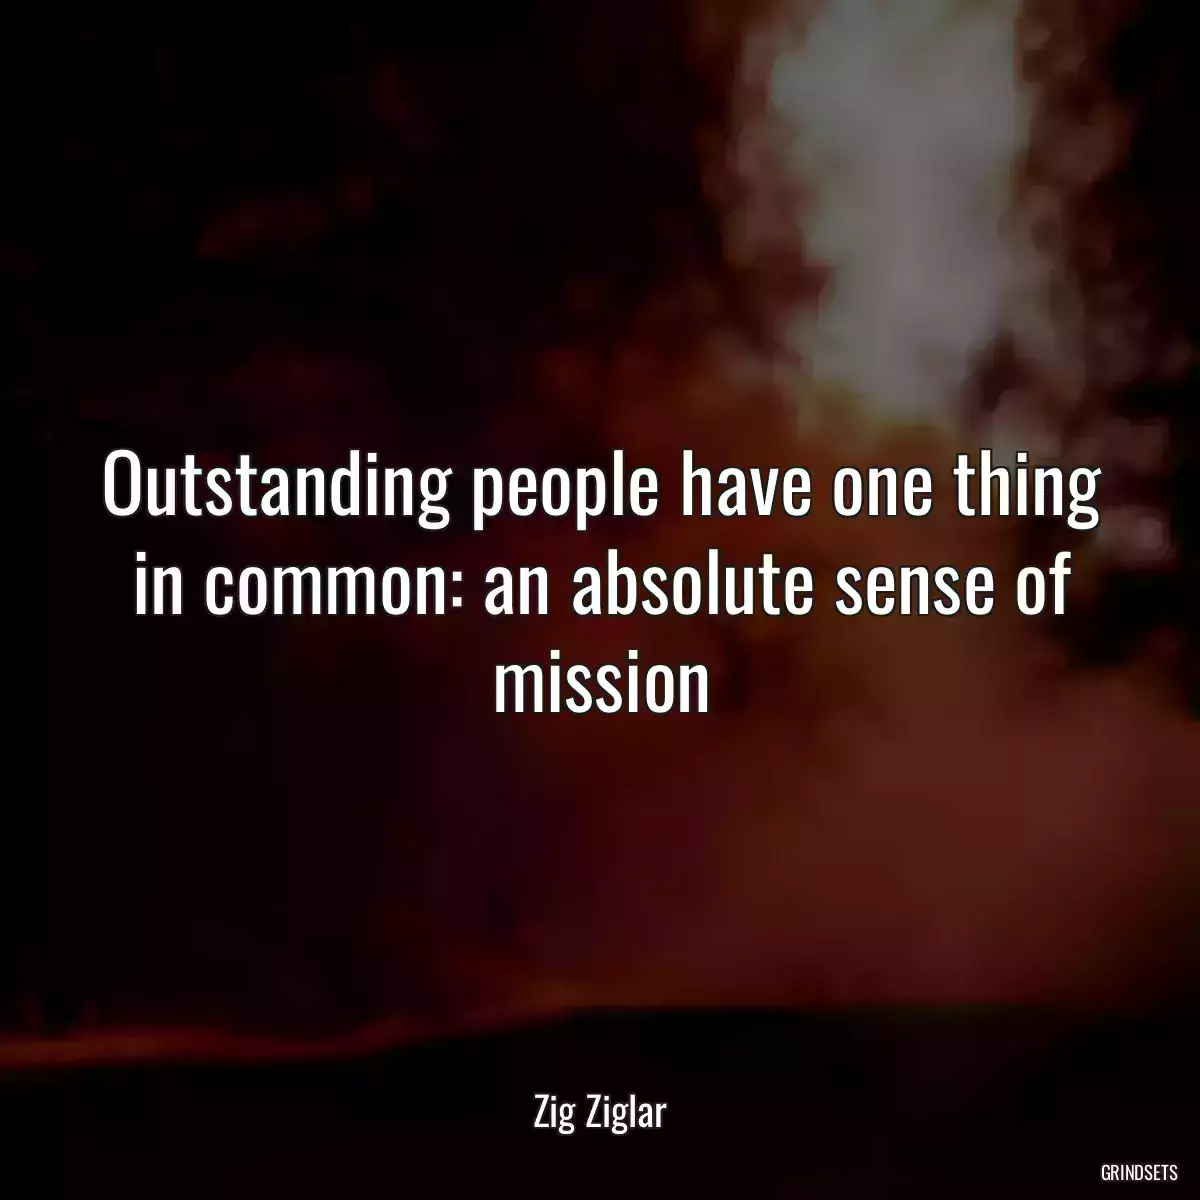 Outstanding people have one thing in common: an absolute sense of mission